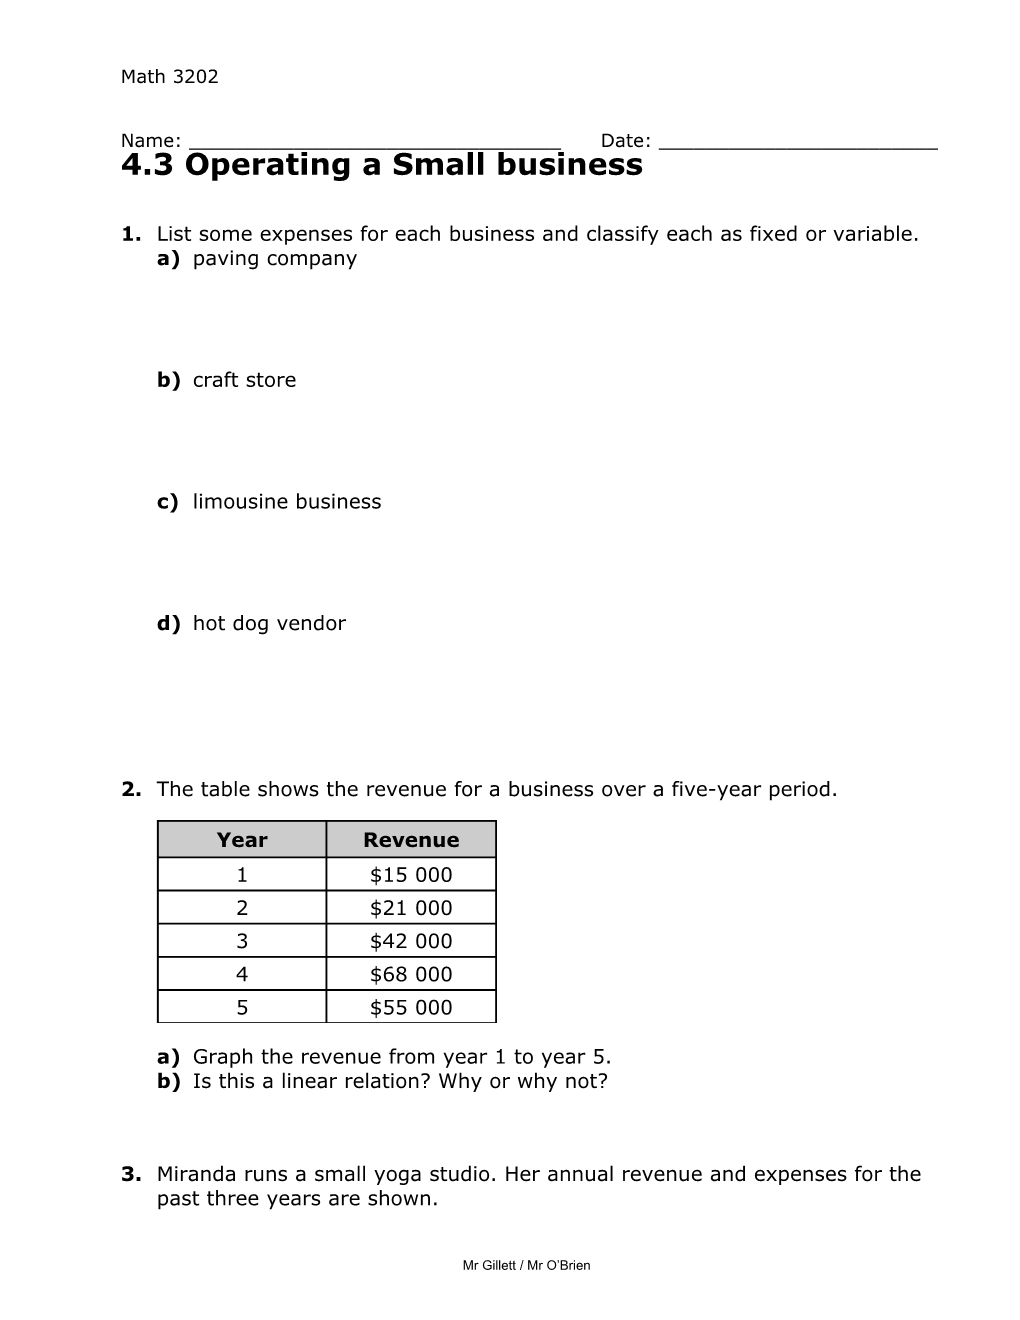 4.3Operating a Small Business